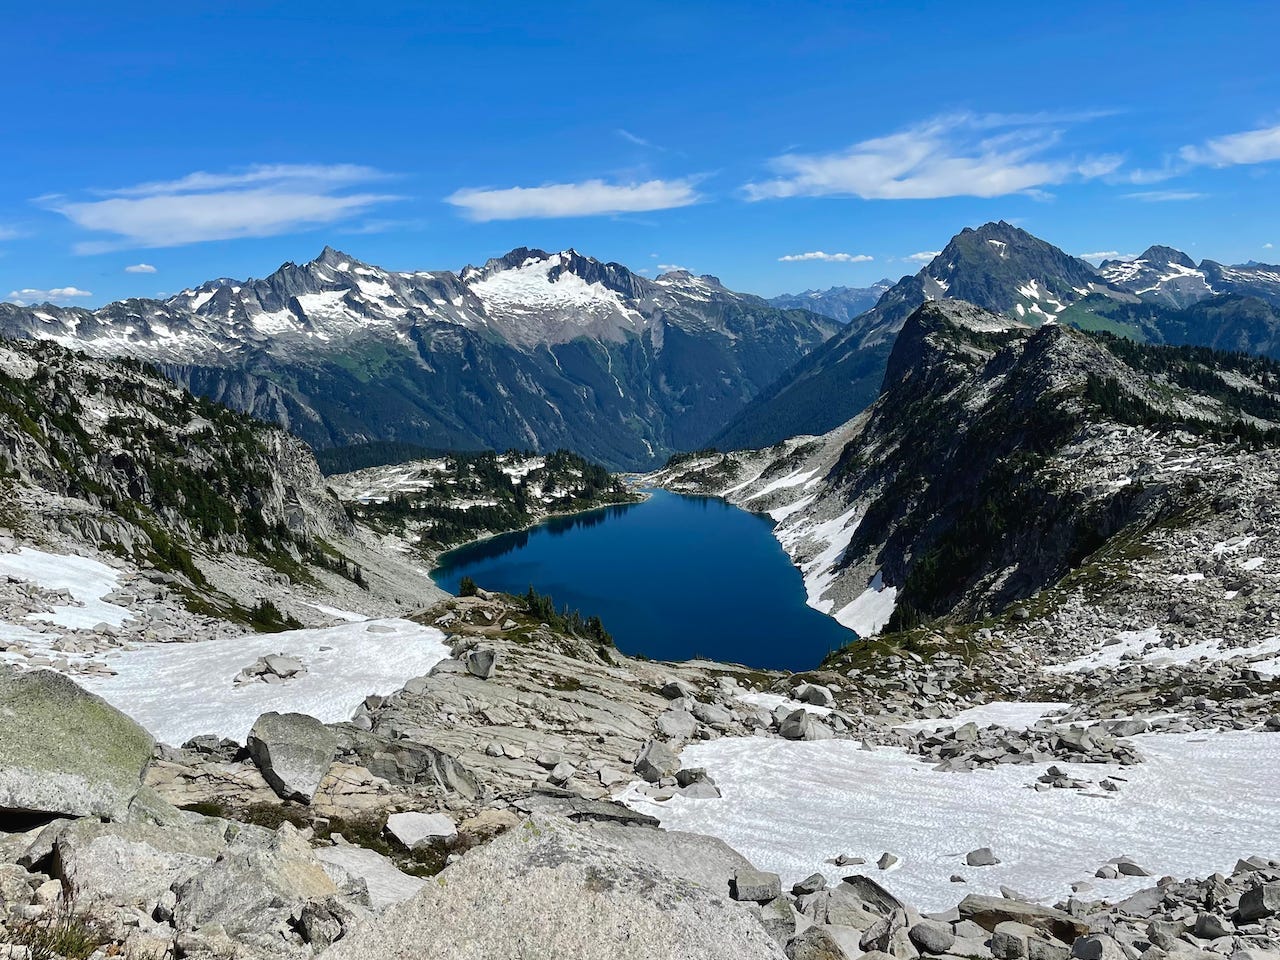 <p>According to Karen, some of the best national parks to visit in the summer are high alpine parks "<span>in the general northwest part of the country."</span></p><p><span>The Smiths say North Cascades is a prime example and provides a perfect visit from July to September. </span></p><p><span>The alpine hiking trails are reminiscent of the Swiss Alps and make you feel like you're in the wilderness despite only being a few hours from busy cities and towns like Bellingham and Mount Vernon, they added. </span></p>